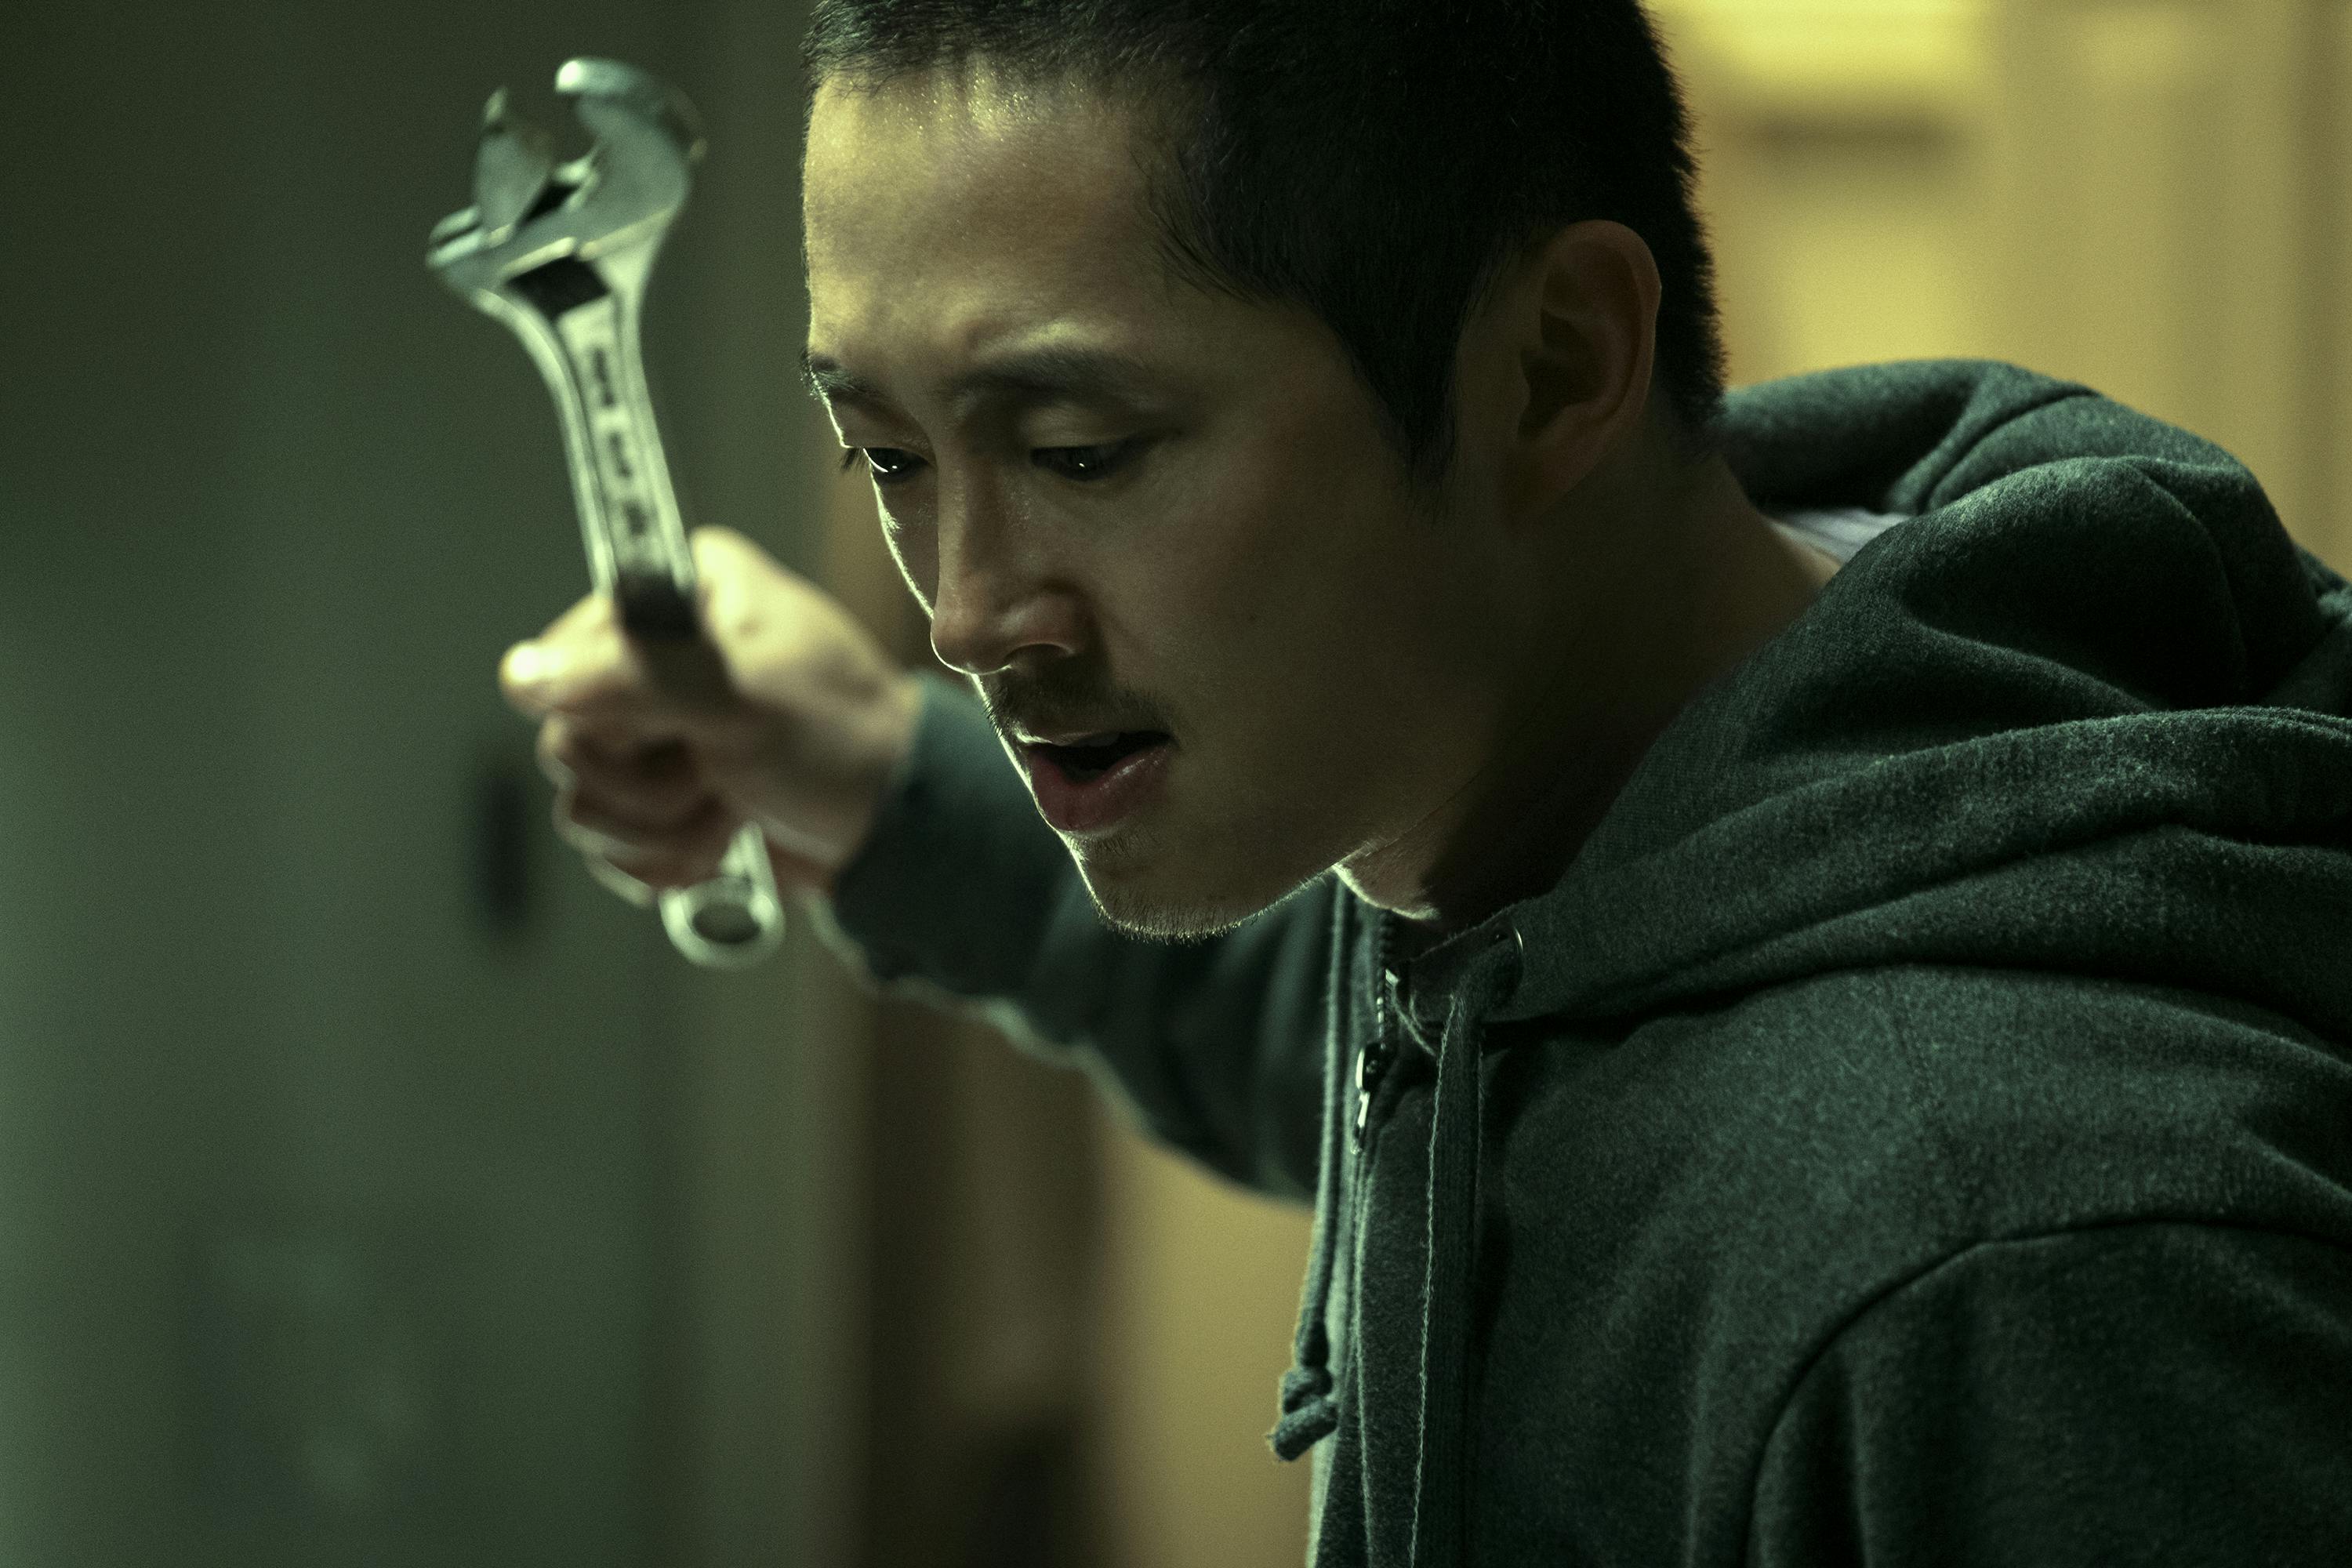 Danny (Steven Yeun) holds a wrench up, with a ferocious expression.